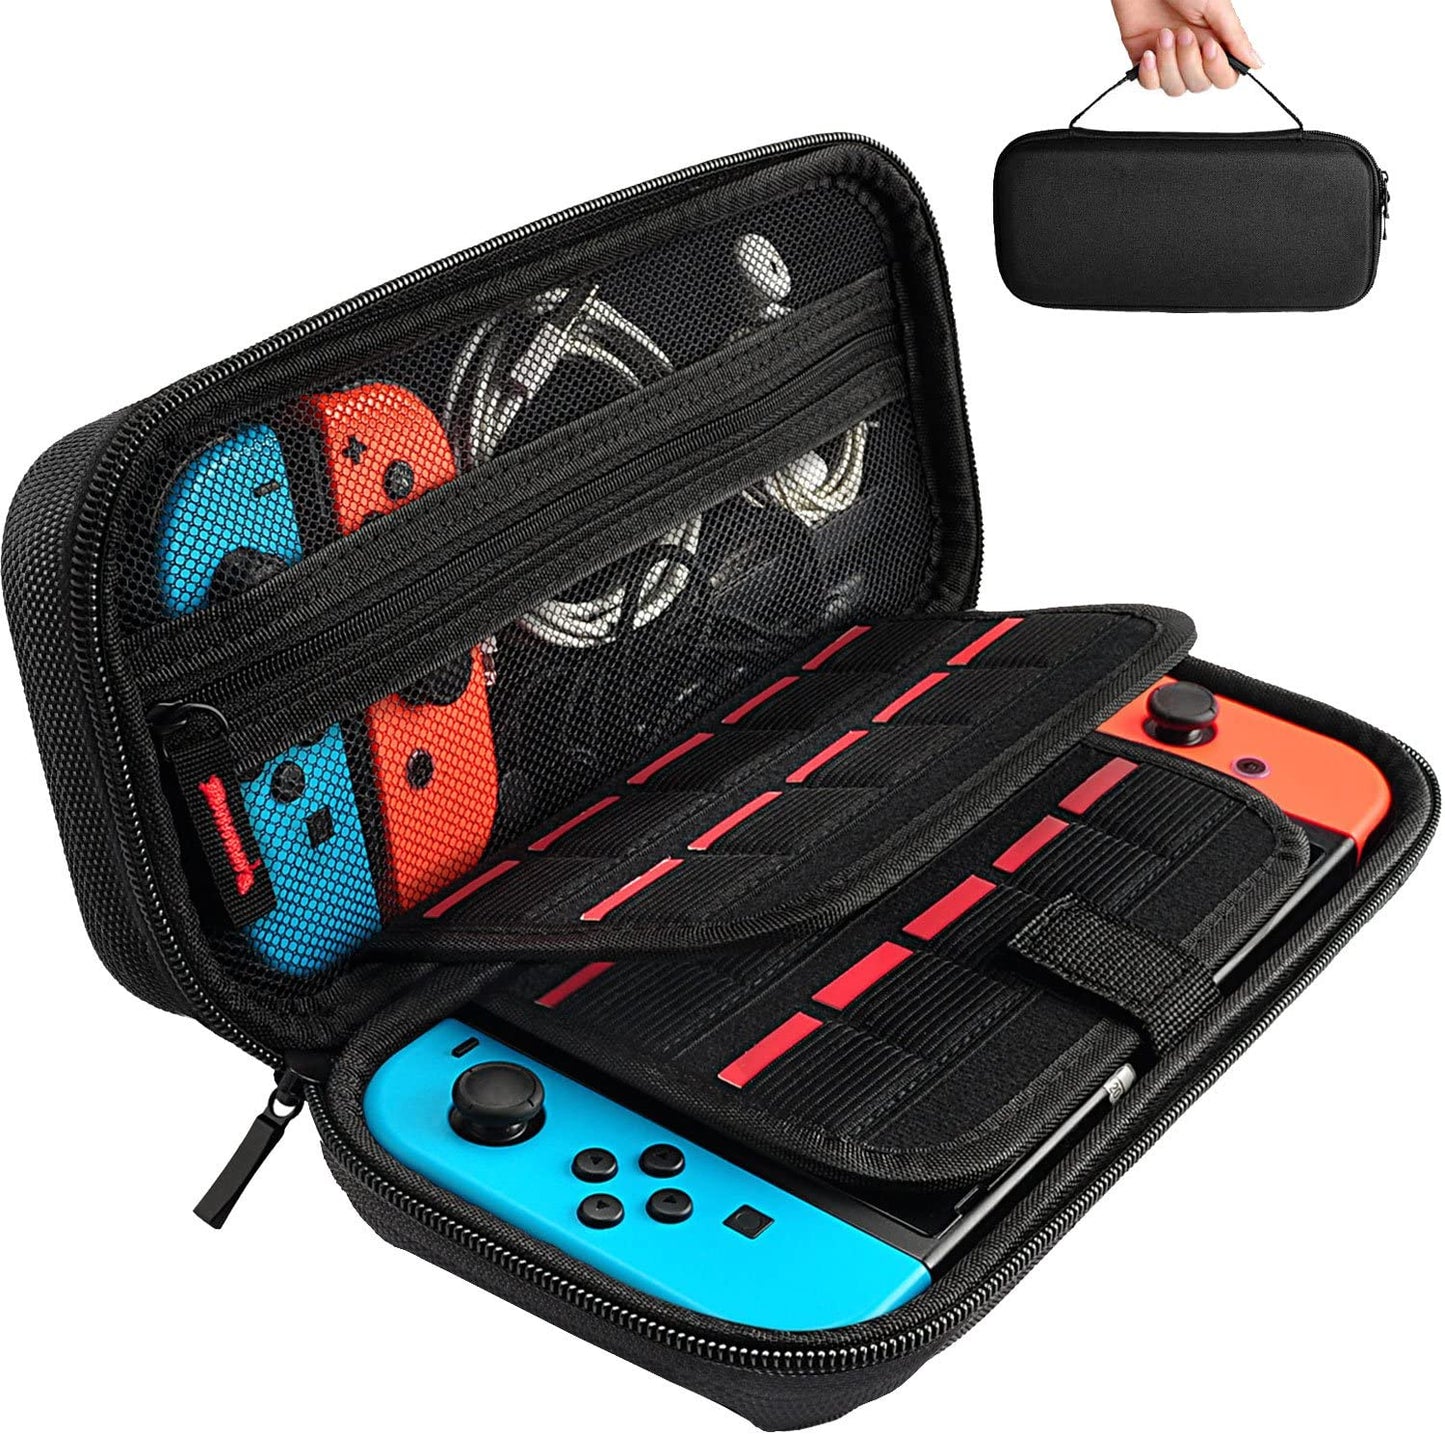 Switch Case Compatible with Nintendo Switch/Switch OLED - Carrying Case with 20 Game Cartridges, Protective Hard Shell Travel Case Pouch for Nintendo Switch Console & Accessories, Black Wintory